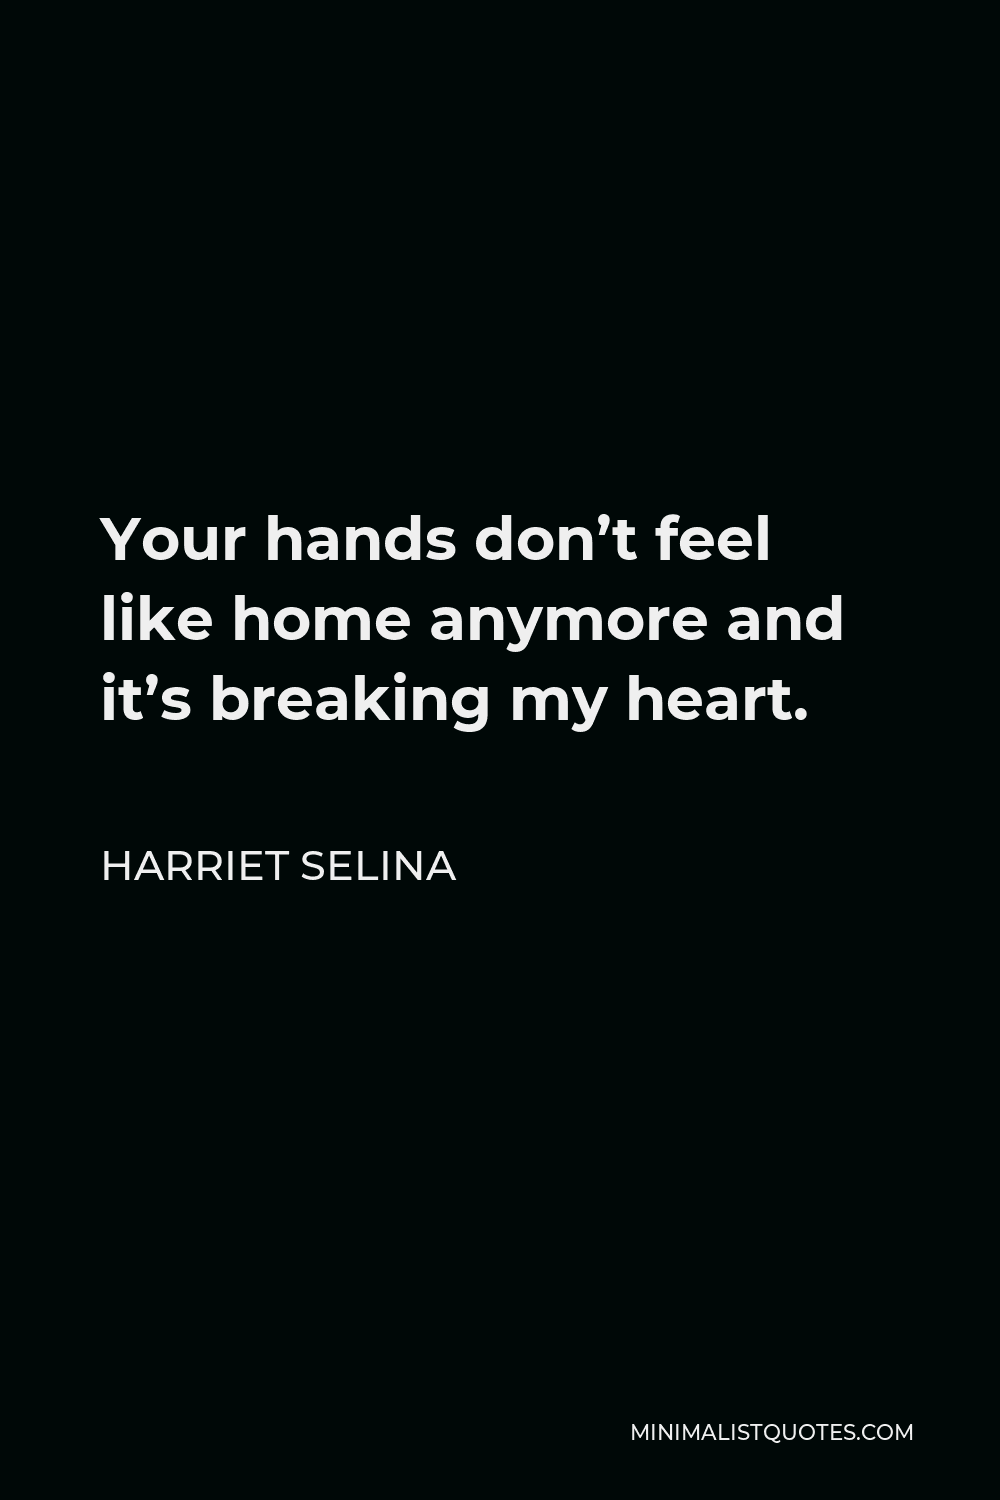 Harriet Selina Quote - Your hands don’t feel like home anymore and it’s breaking my heart.